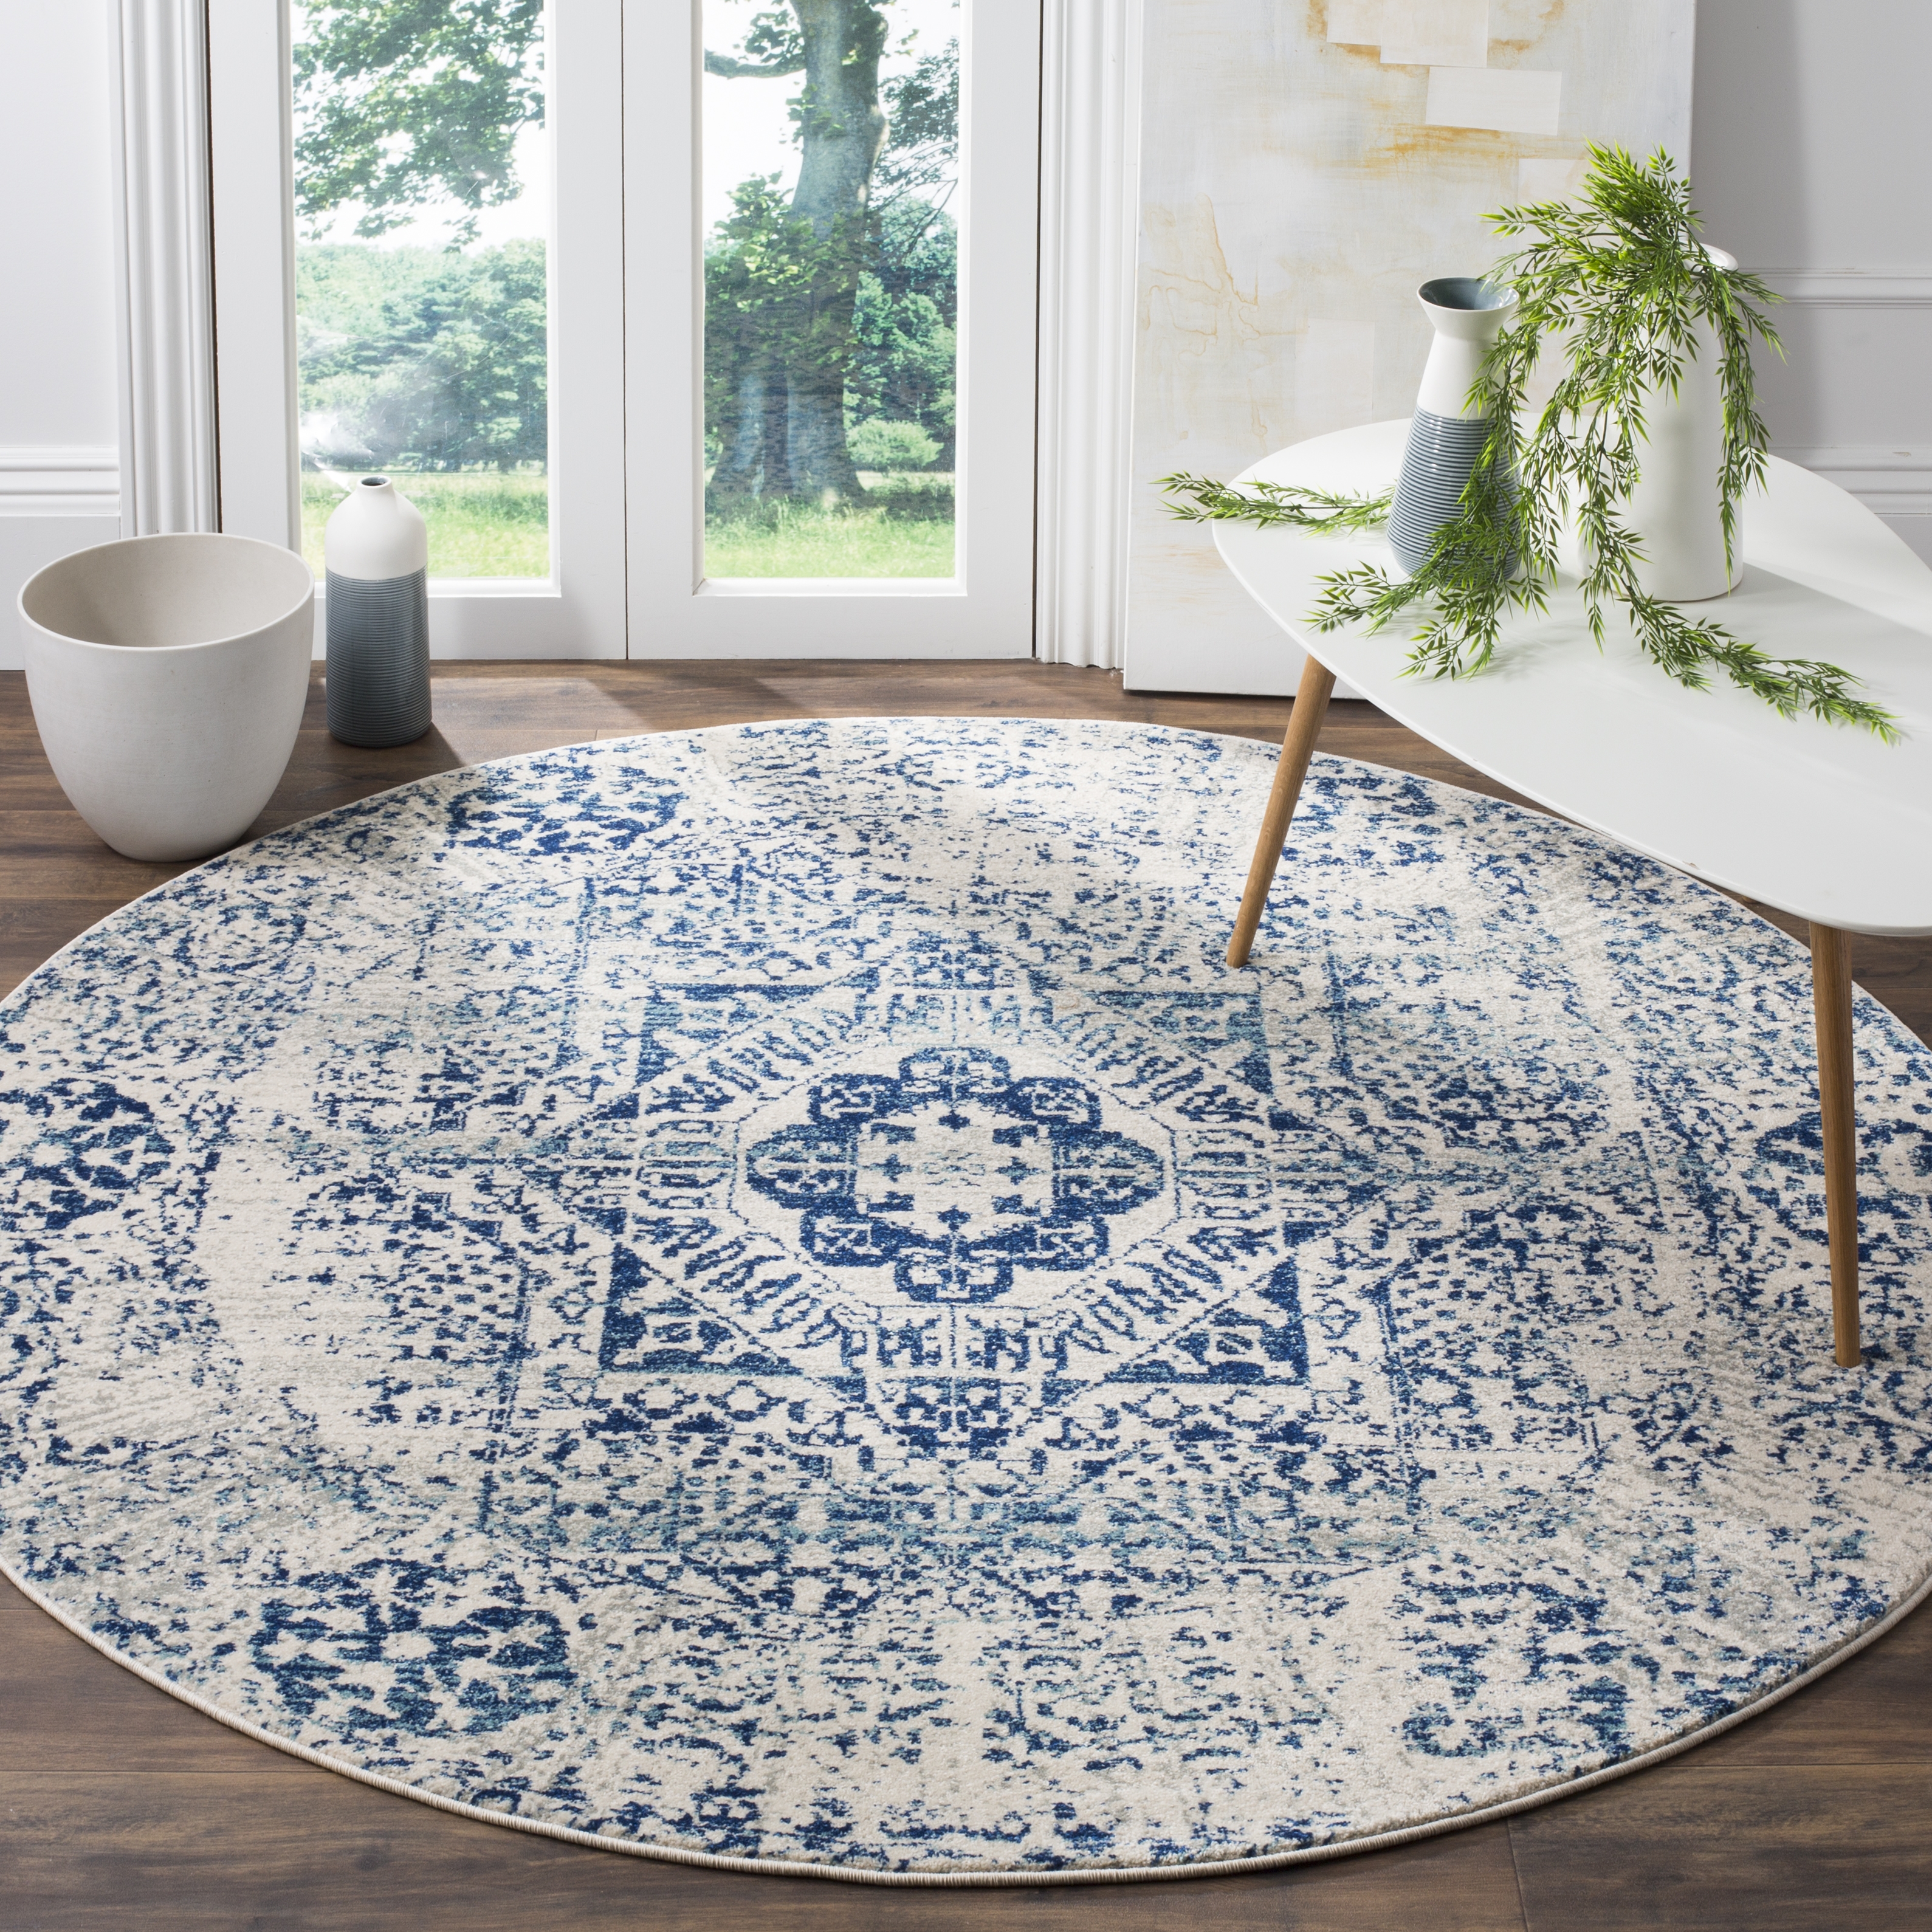 Arlo Home Woven Area Rug, EVK260C, Ivory/Blue,  5' 1" X 5' 1" Round - Image 1